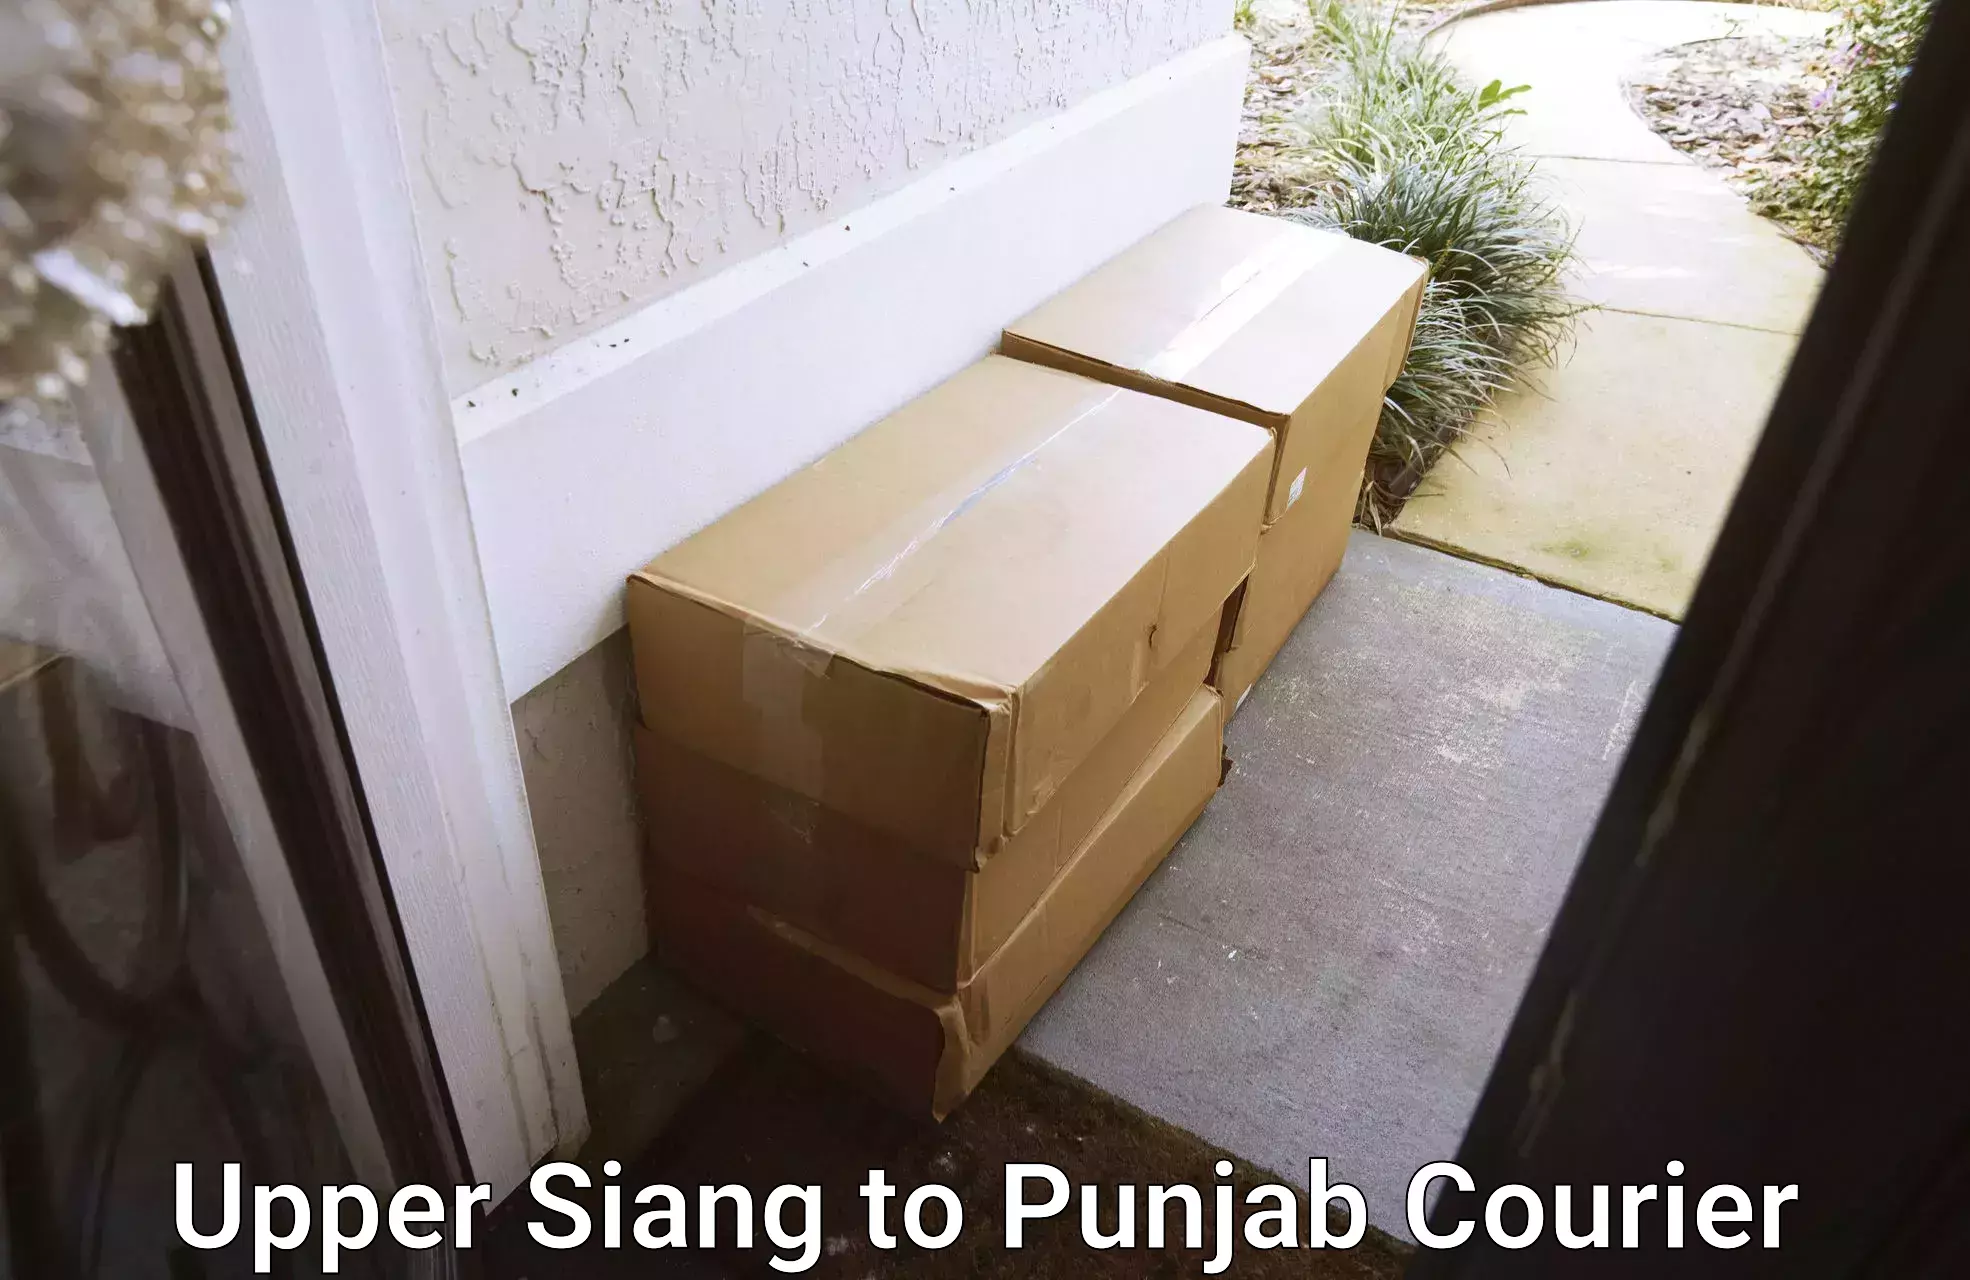 On-call courier service Upper Siang to Sangrur